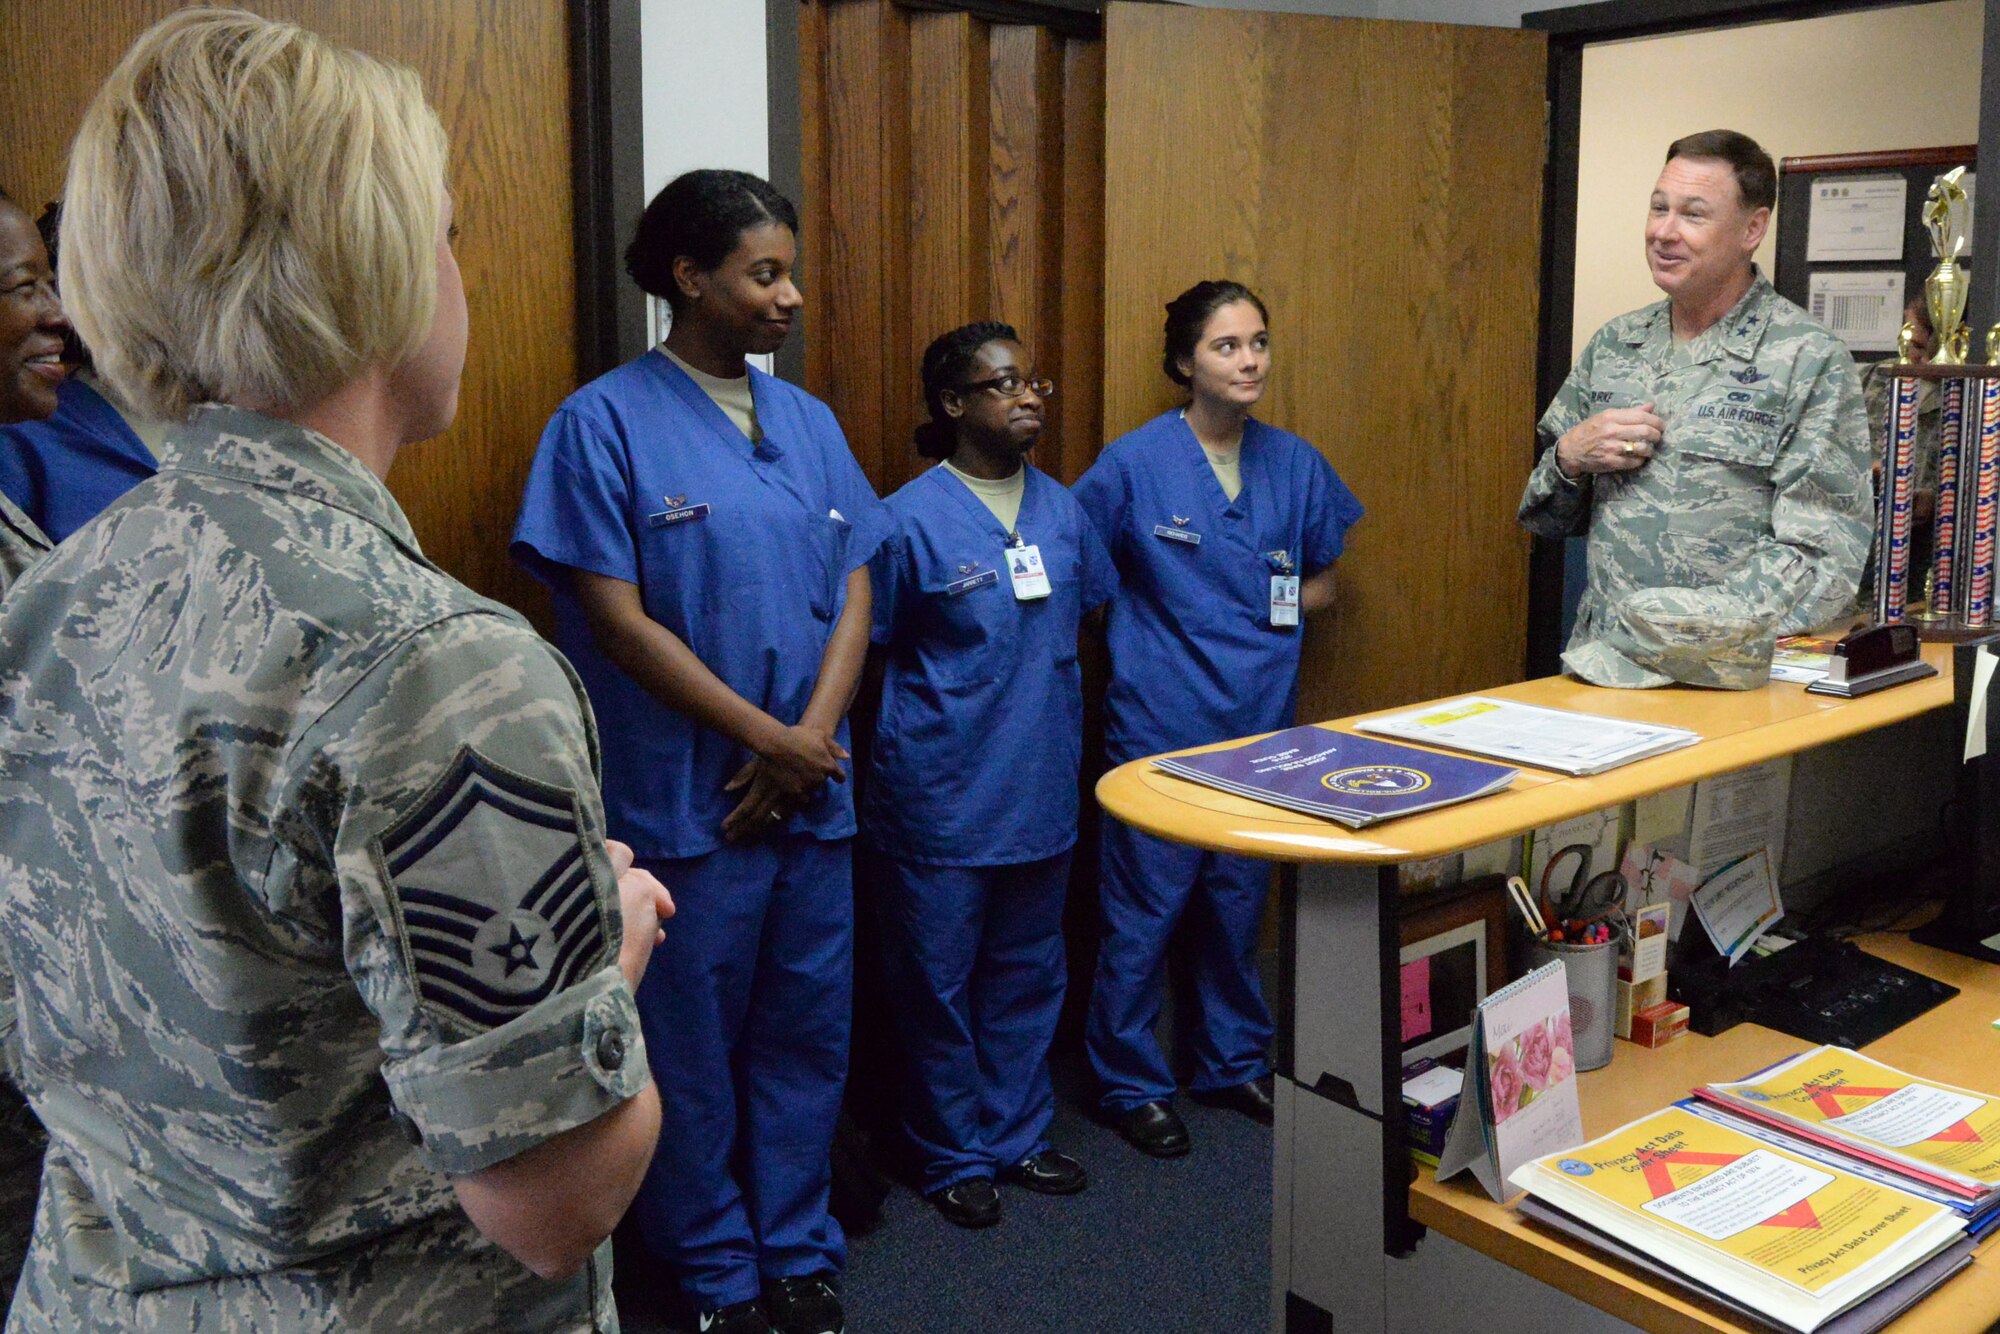 Air Force District of Washington Commander Maj. Gen. Darryl Burke meets members of the 579th Medical Group on Joint Base Anacostia-Bolling, Washington D.C., June 9, 2016.  Gen. Burke visited the Airmen of the dental clinic to present a coin to Senior Master Sgt. Jennifer Klink for her efforts in making 2015 AFDW Annual Awards banquet a memorable event.